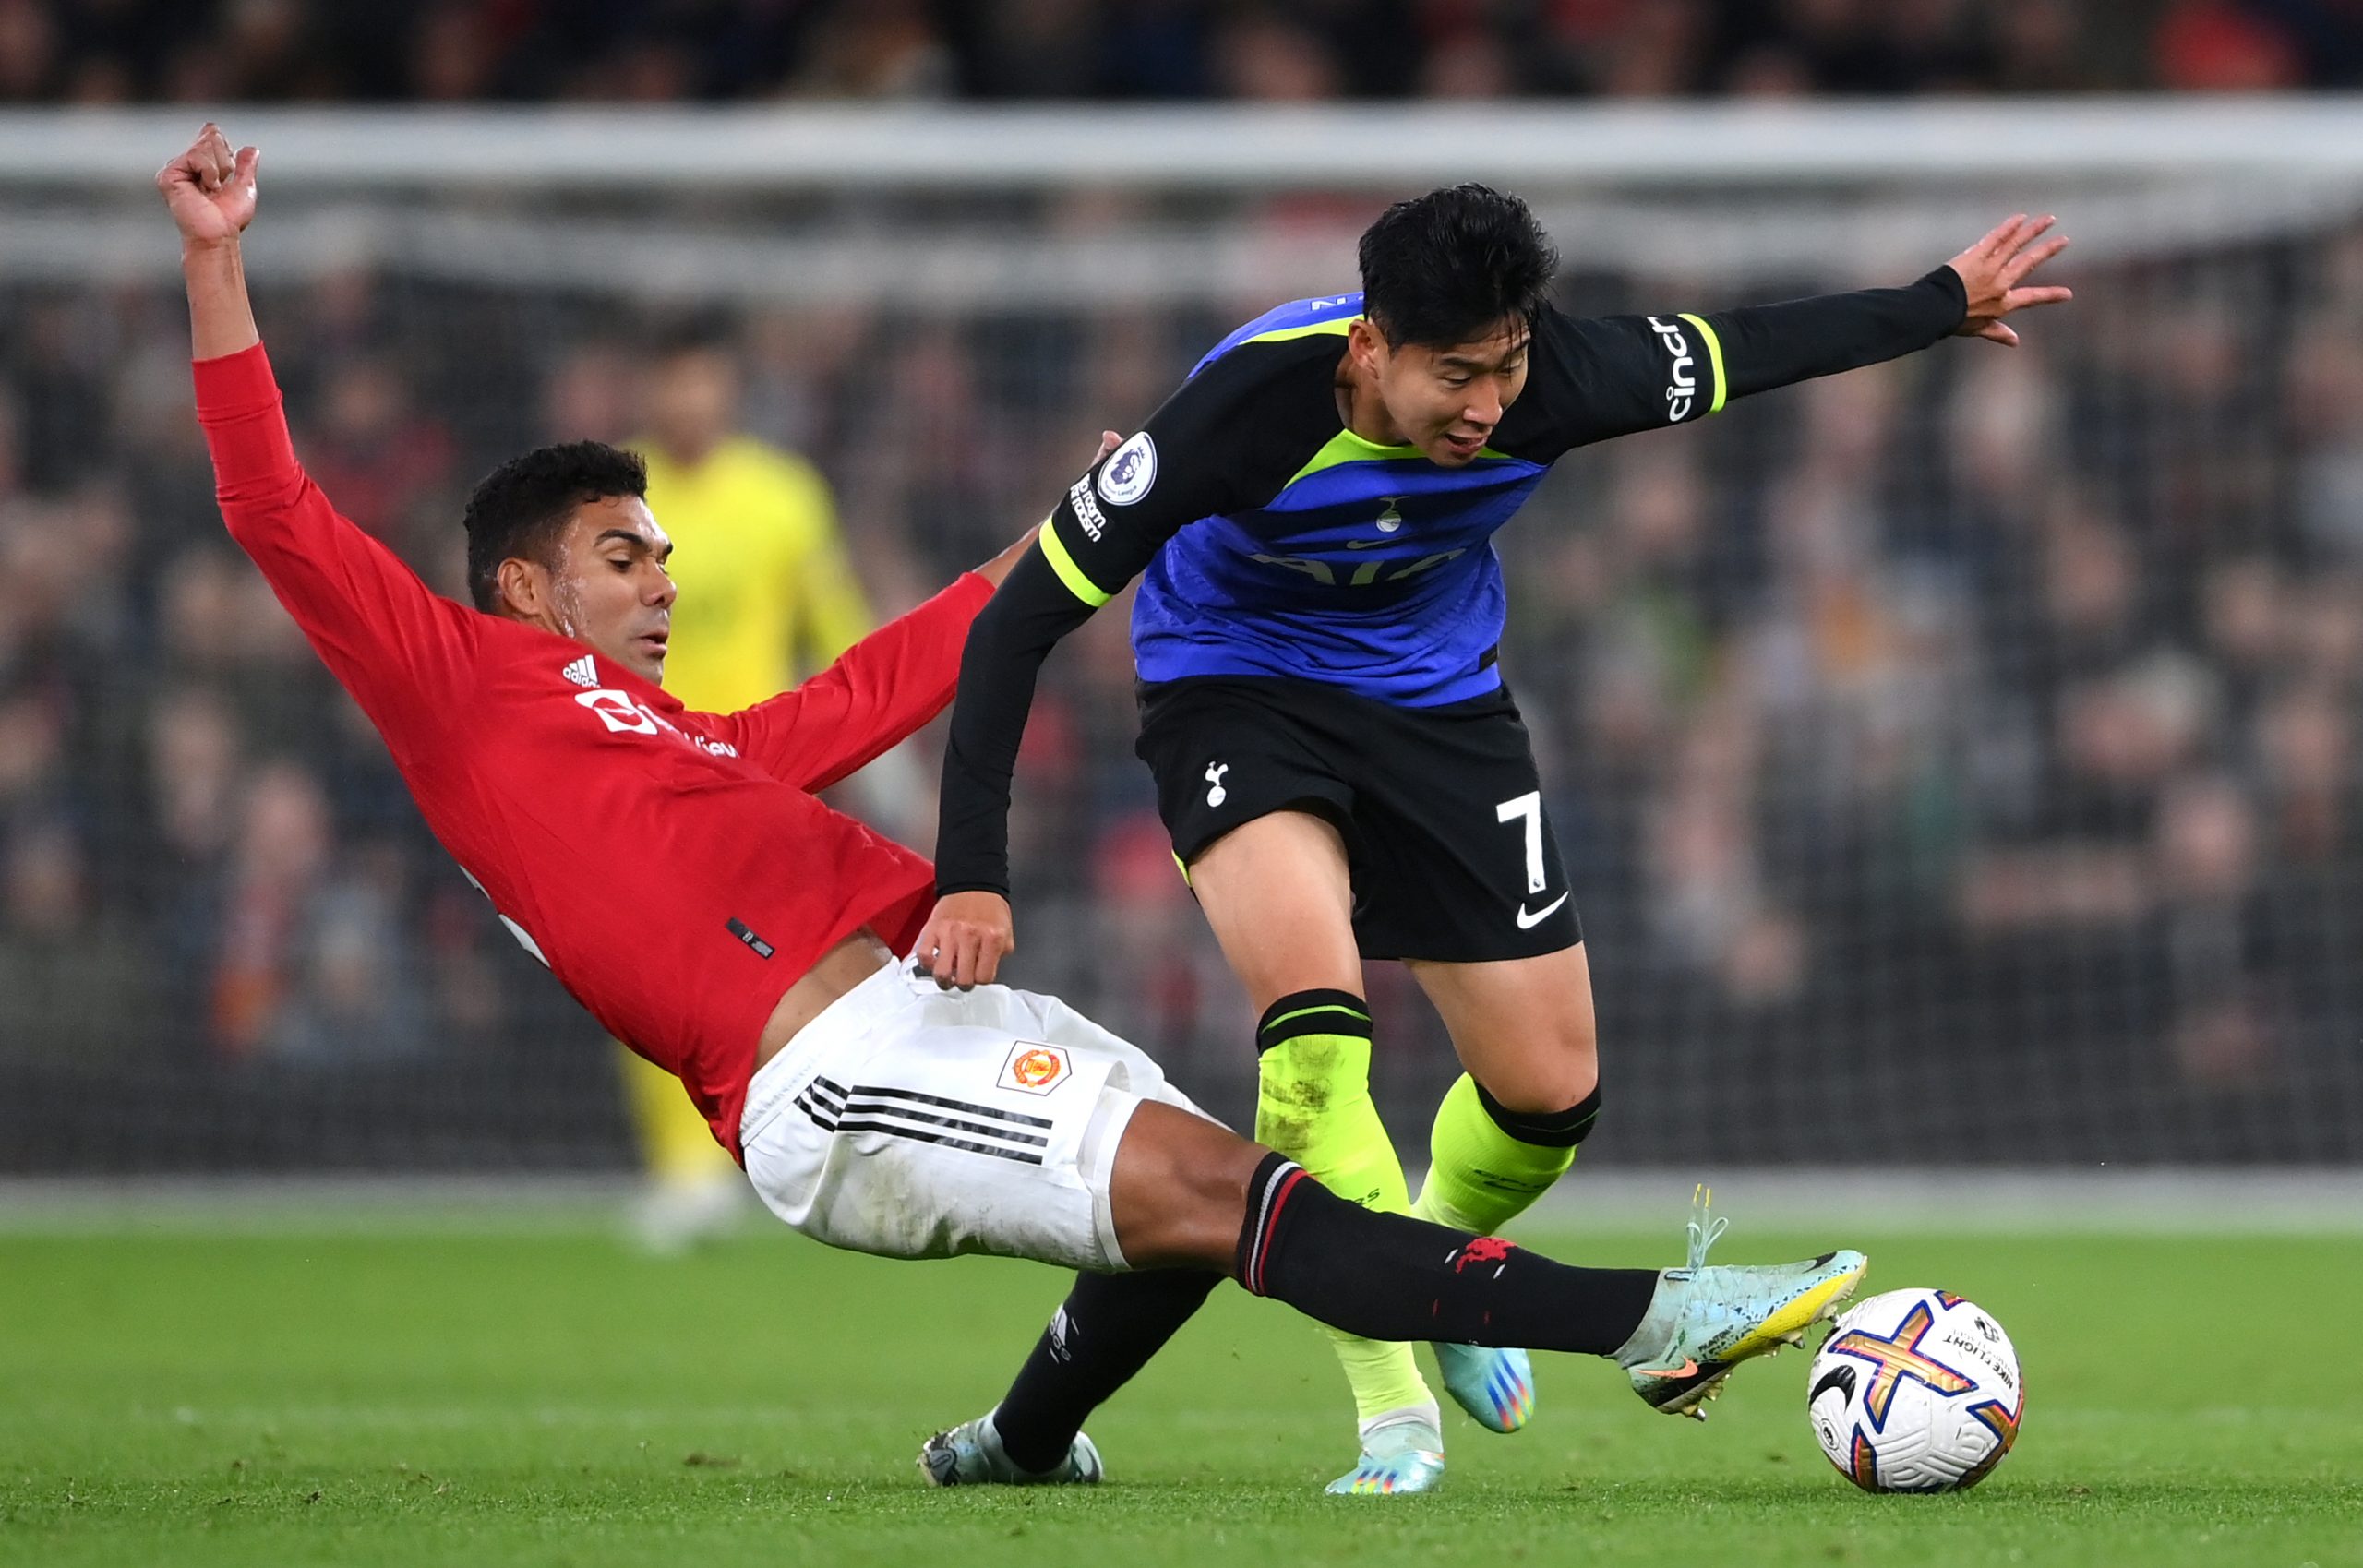 Casemiro in action for Manchester United. (Photo by Laurence Griffiths/Getty Images)